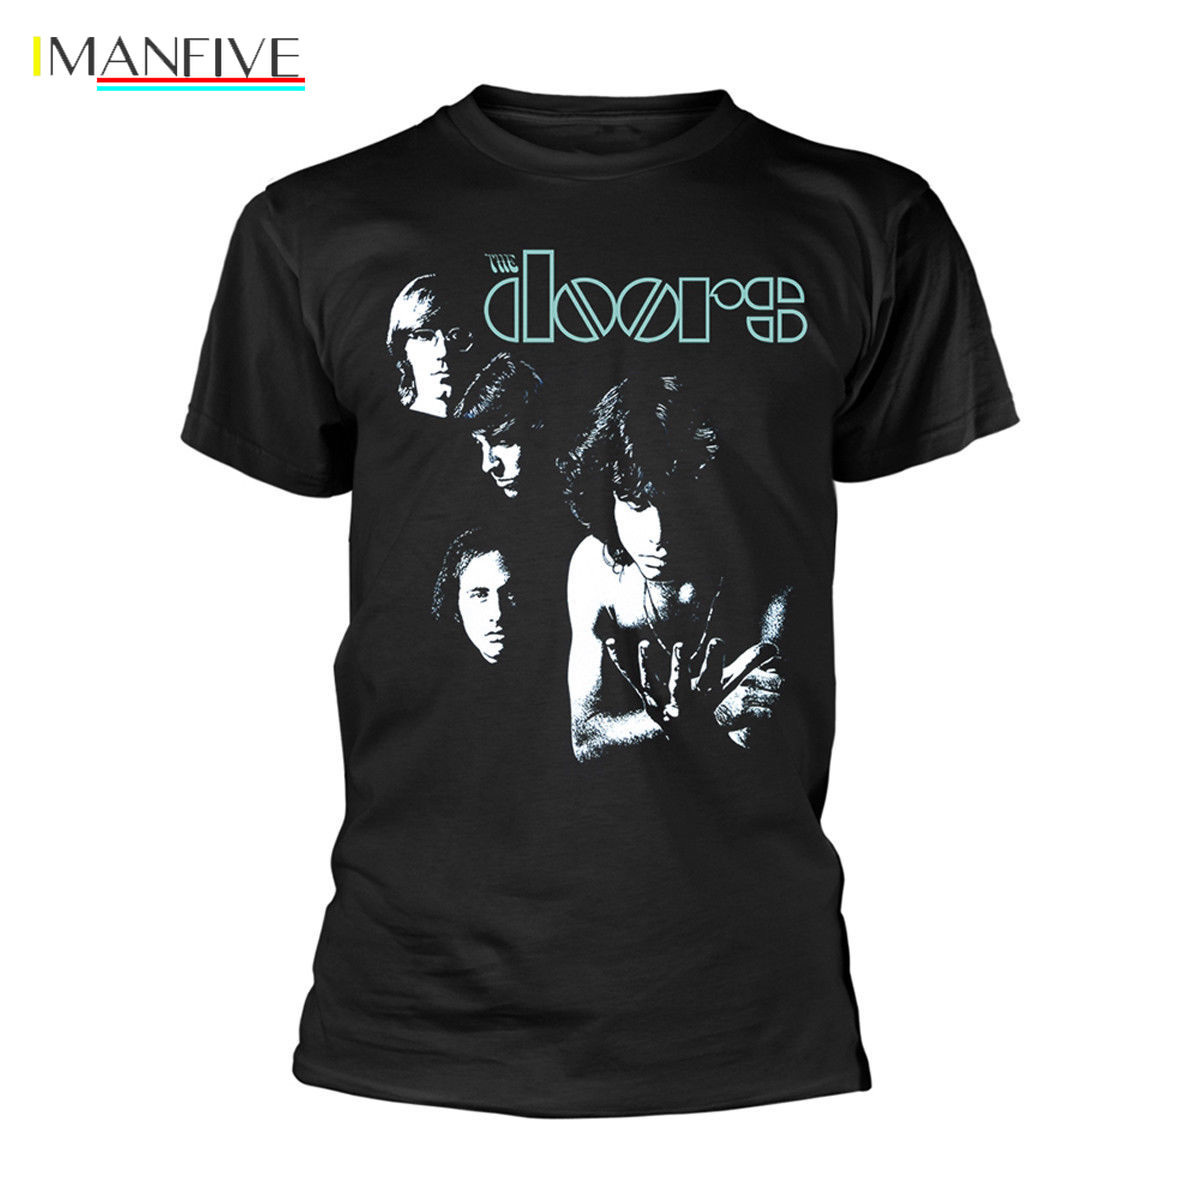 Official The Doors Morrison Gradient Graphic T-Shirt Band Merch Rock American